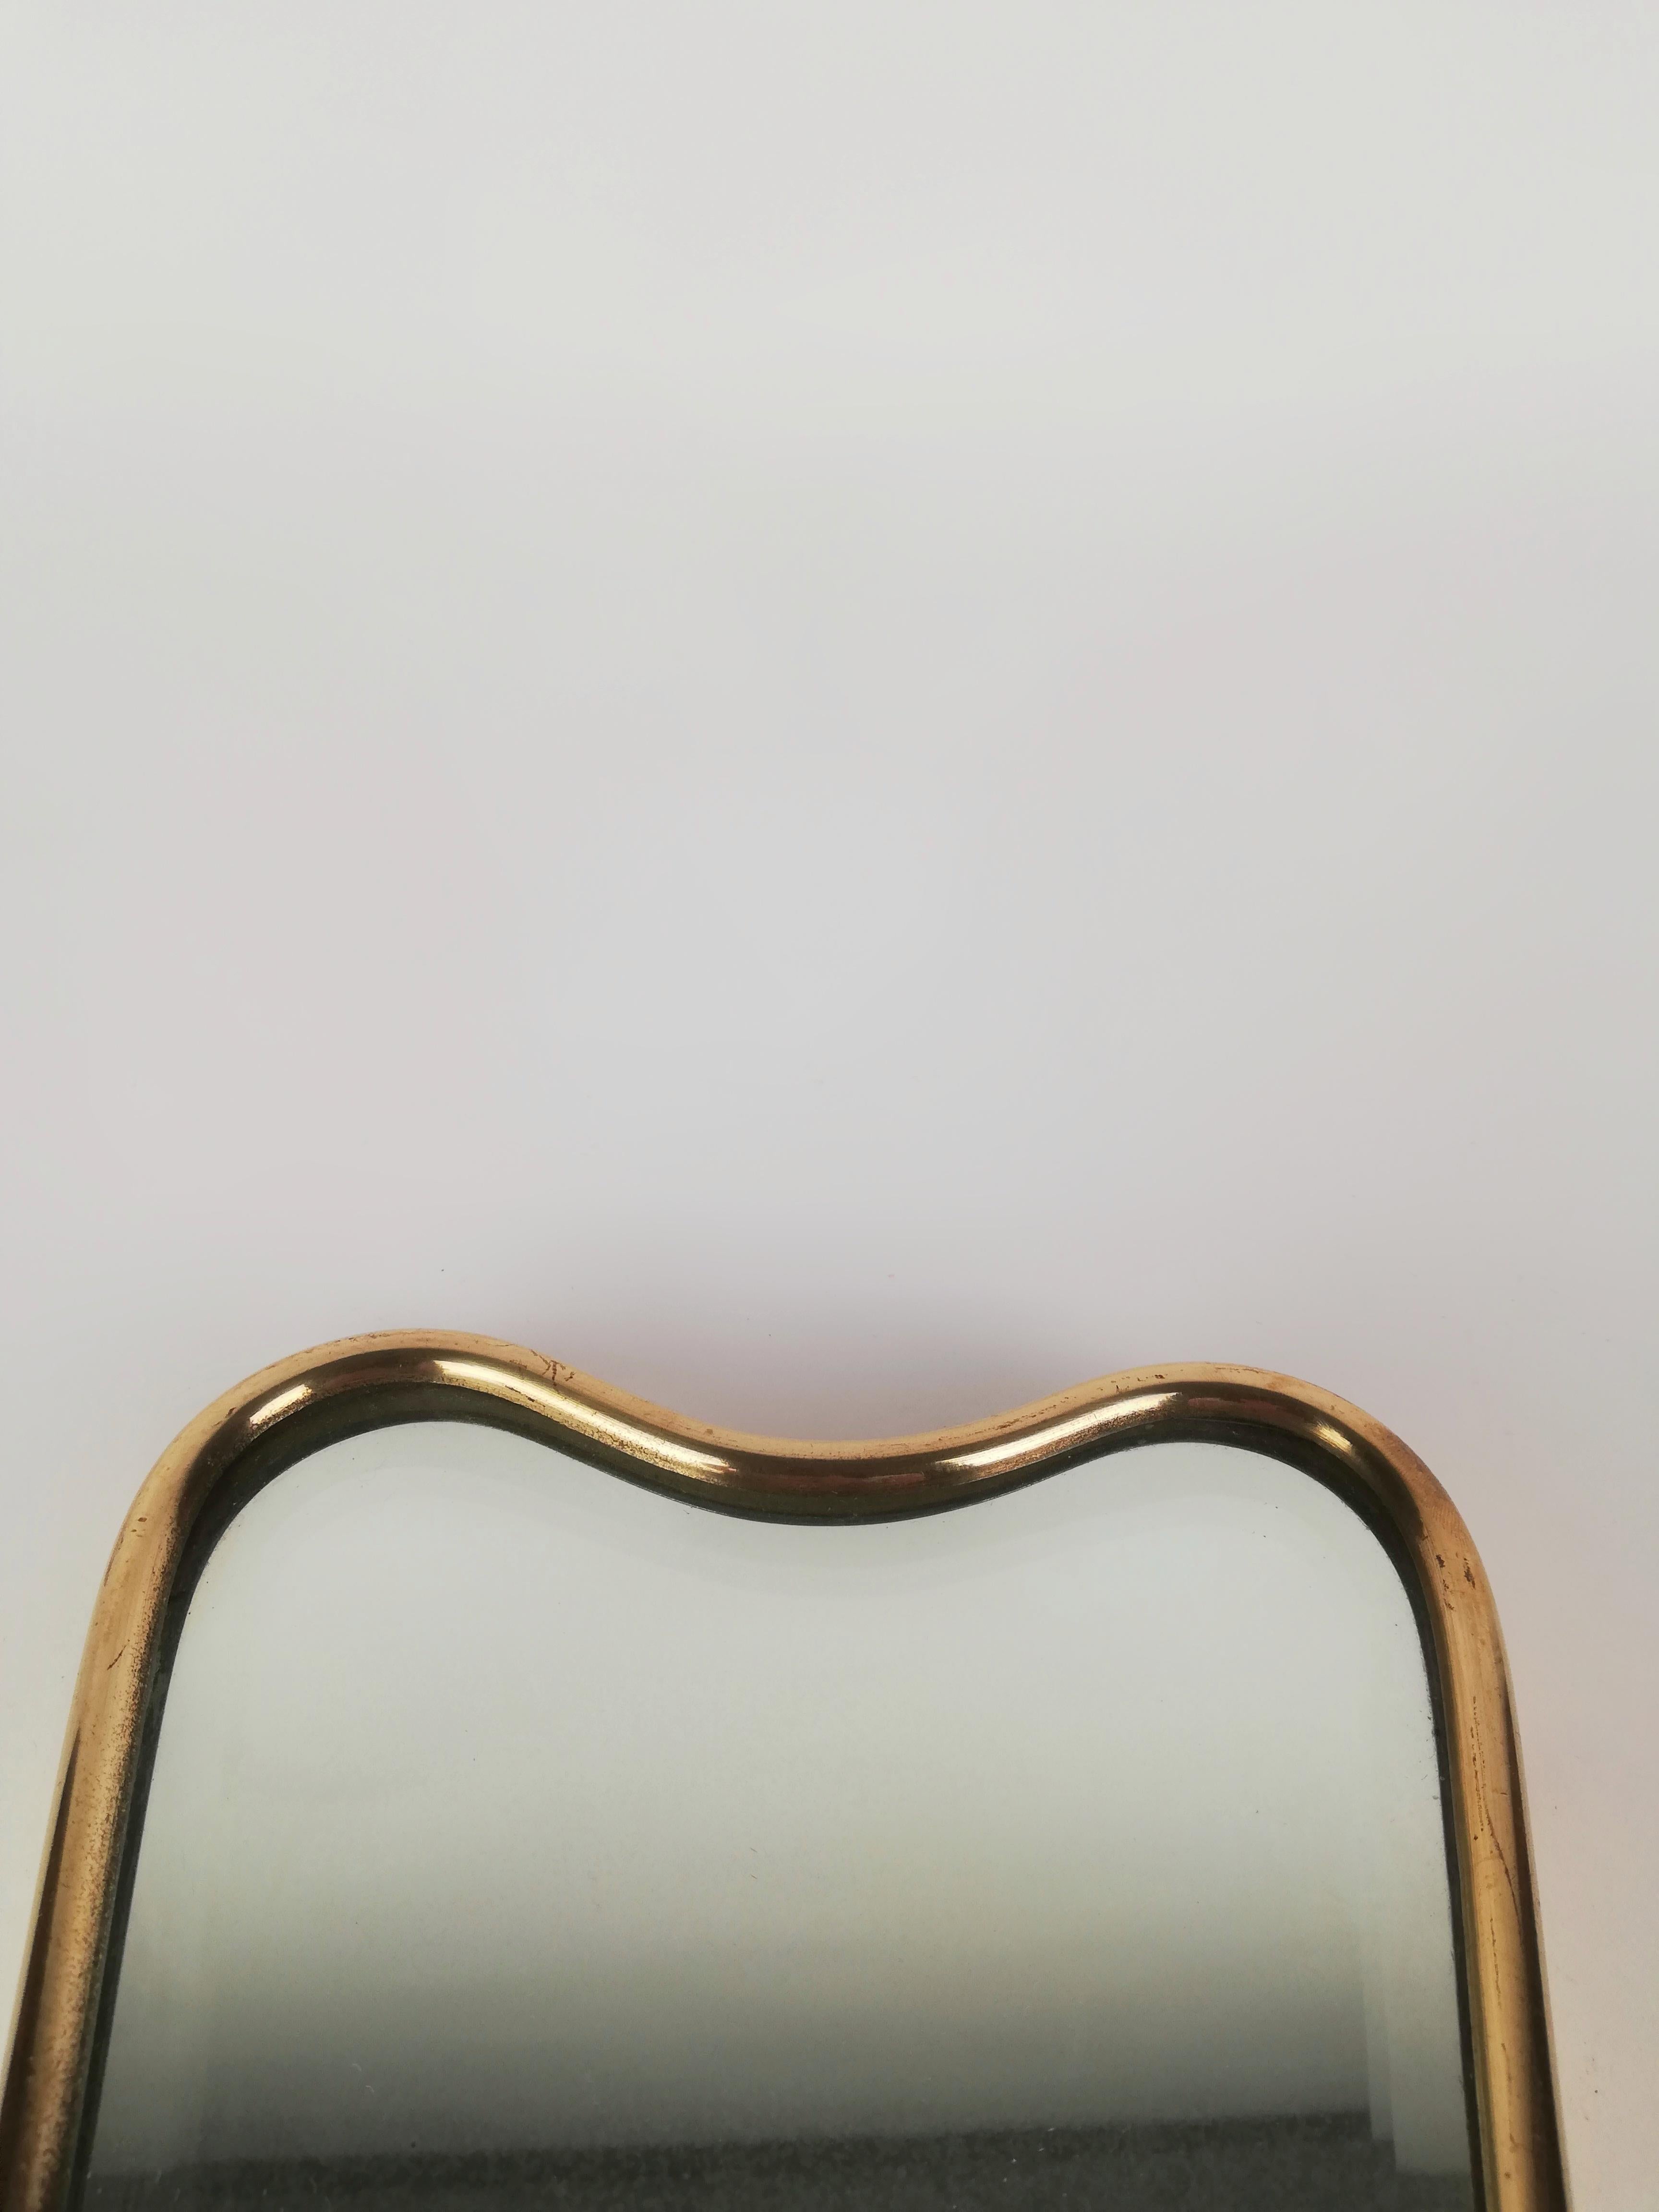 Midcentury Wall Light with Brass Mirrors in the Style of Gio Ponti, Italy, 1950 For Sale 5